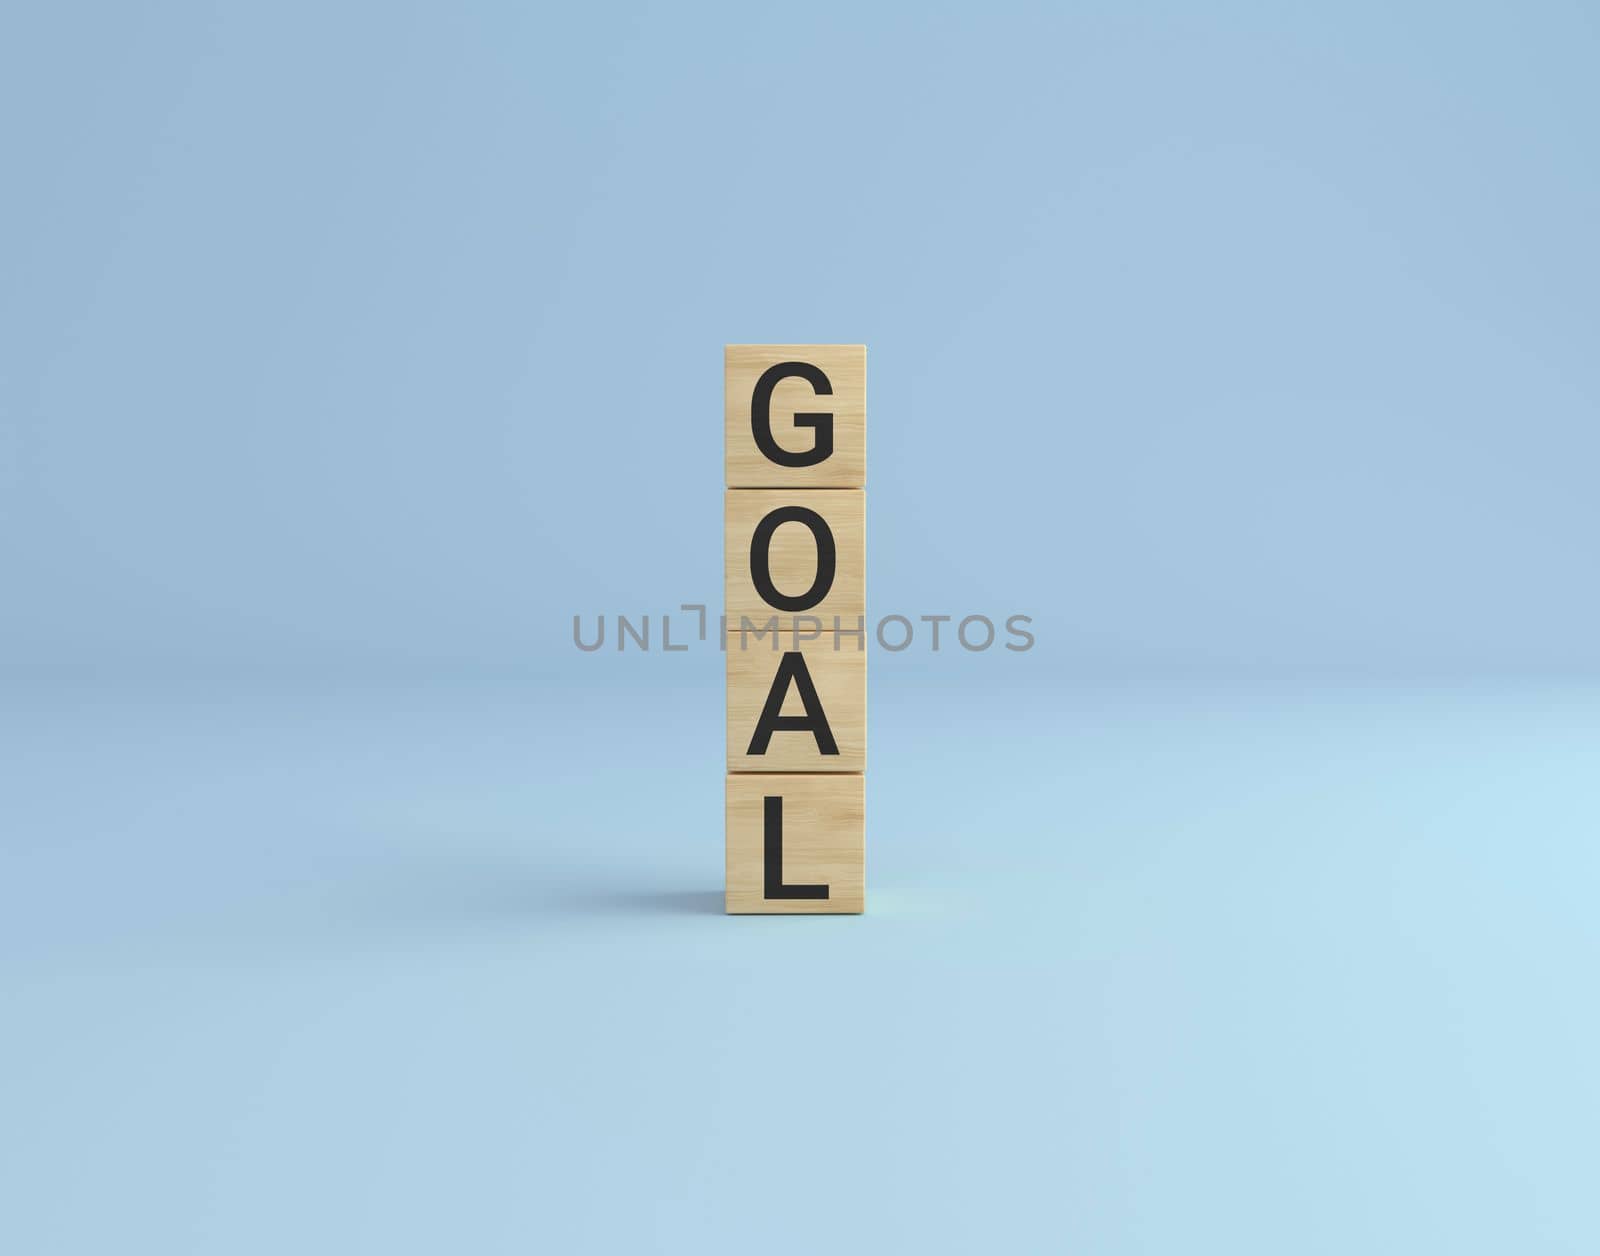 Goal word made with wooden cube blocks tower. business concept.